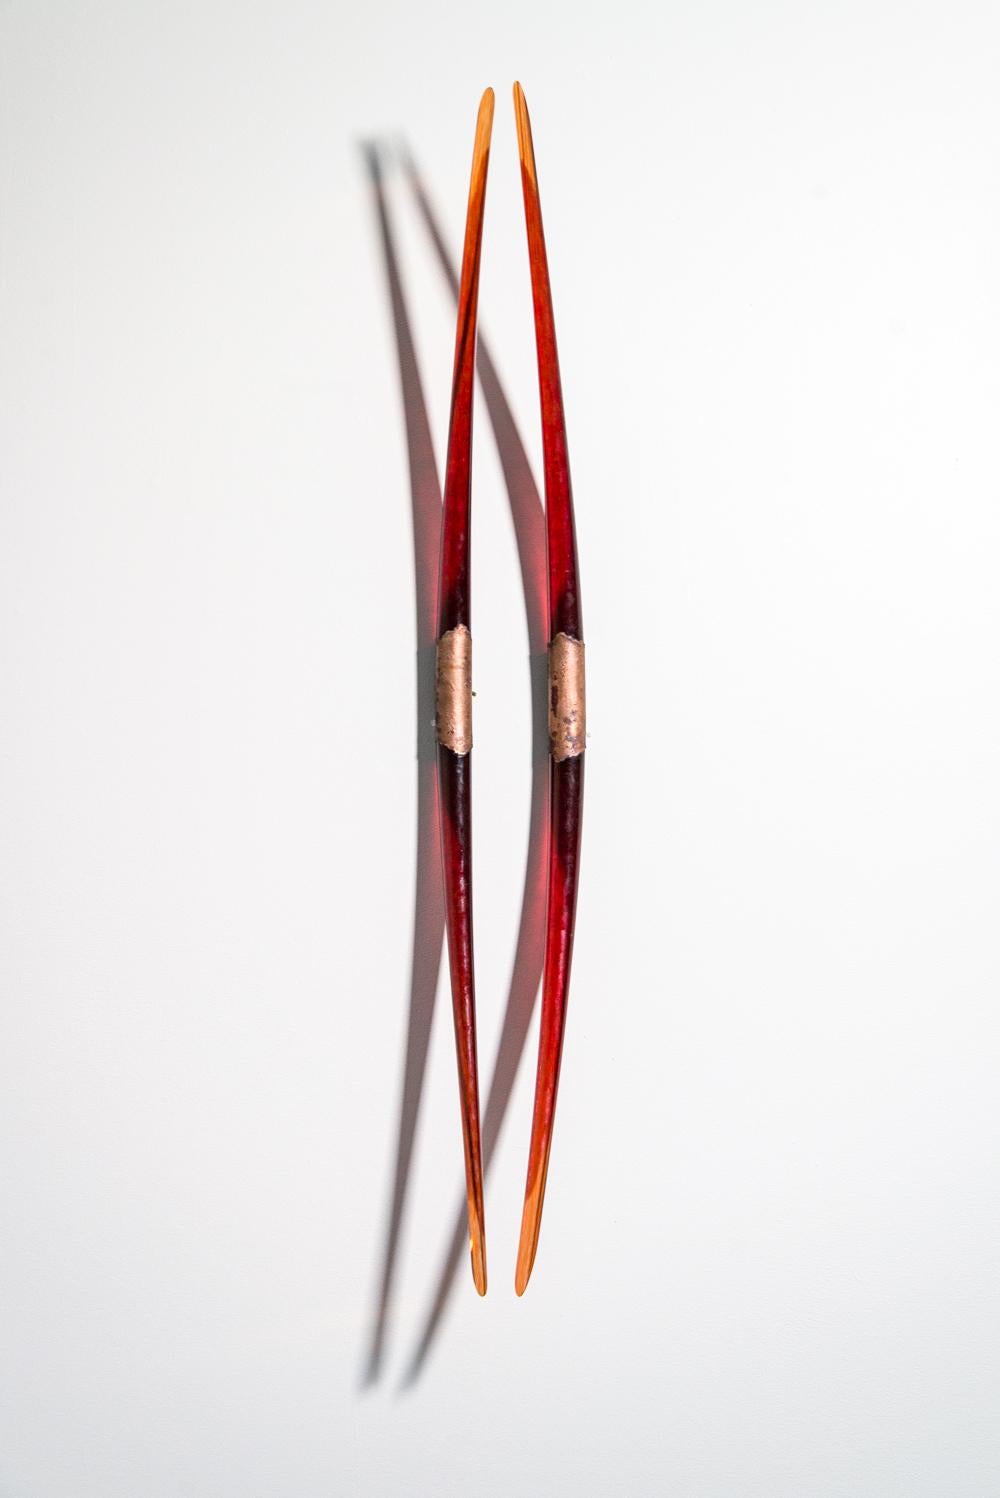 John Paul Robinson Abstract Sculpture - Dual Symmetry - translucent, red, glass, copper, abstract wall sculpture